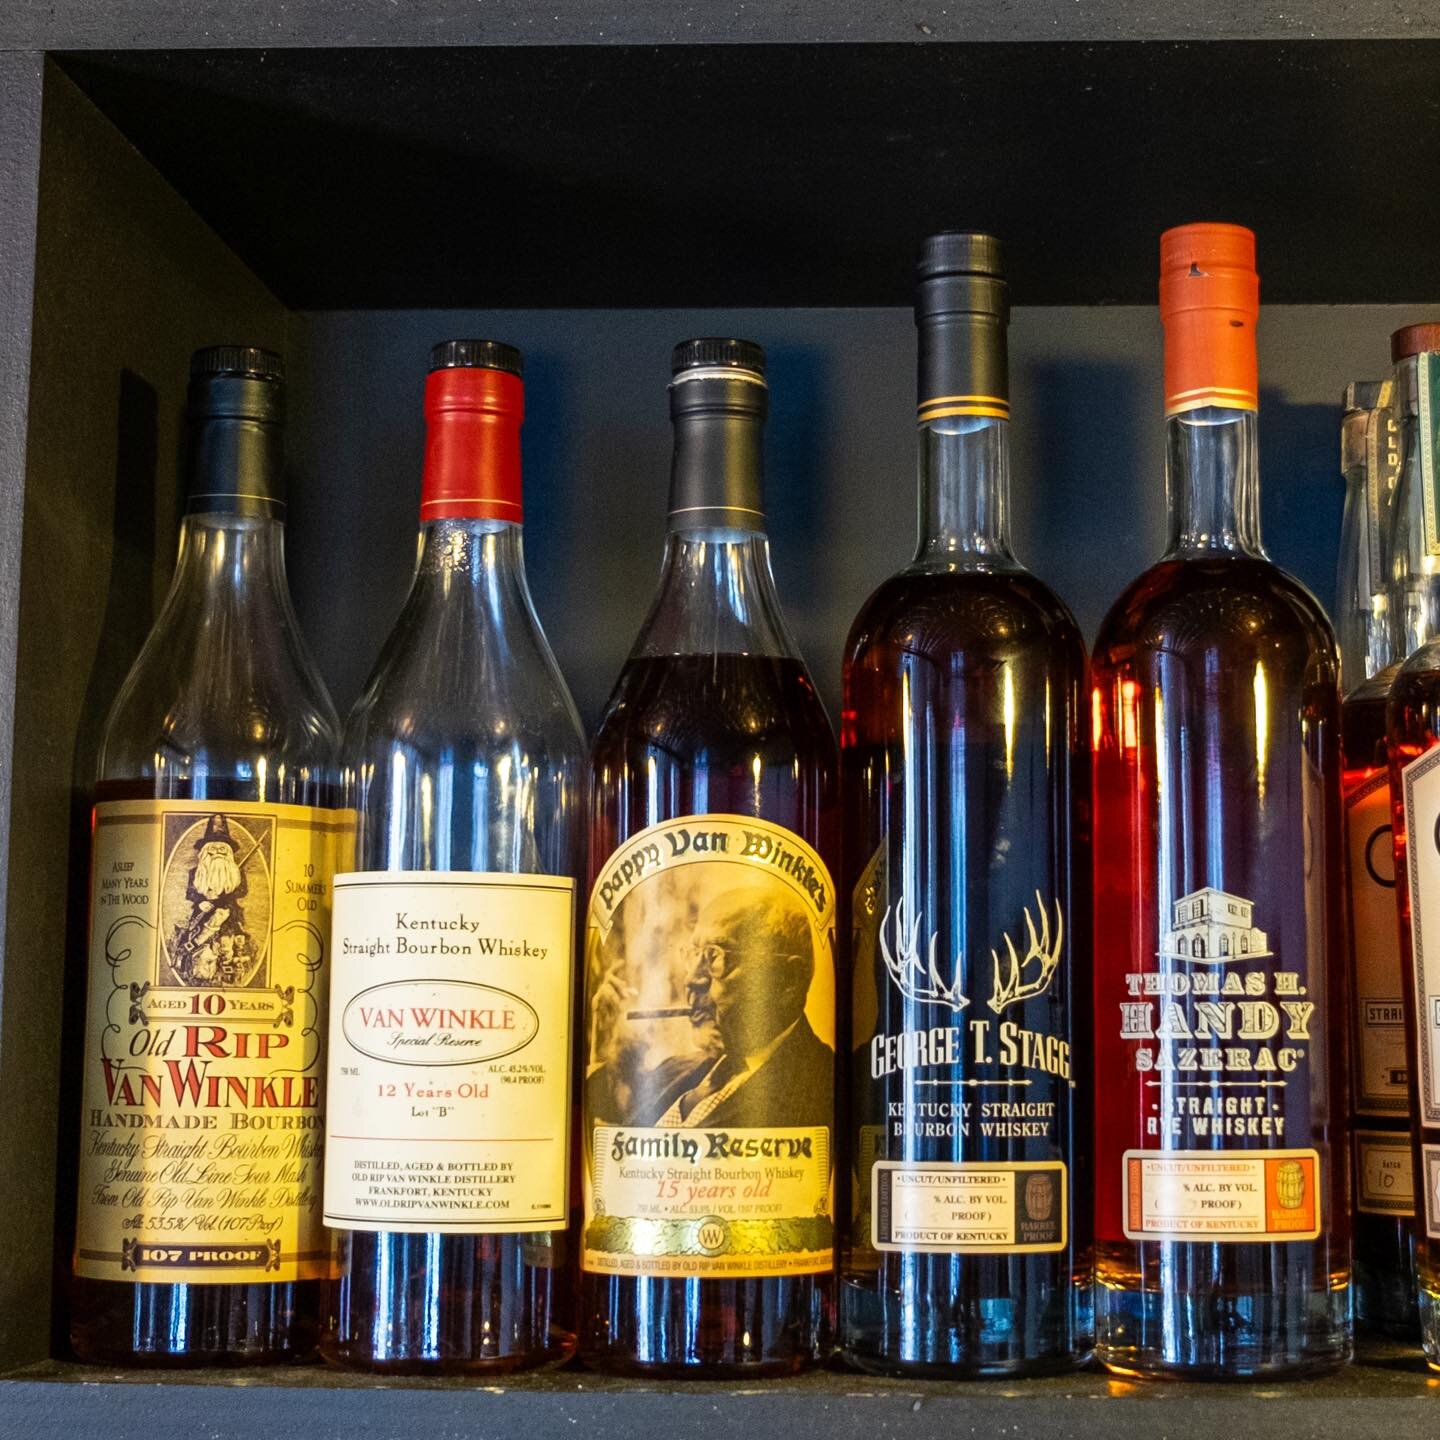 These whiskeys won&rsquo;t last long at these prices! 2 oz pour prices: 
Rip Van Winkle 10 yr $30
Van Winkle 12 yr $40
Pappy Van Winkle 15 yr $50
George T Stagg $50 
Thomas H Handy Sazerac $50